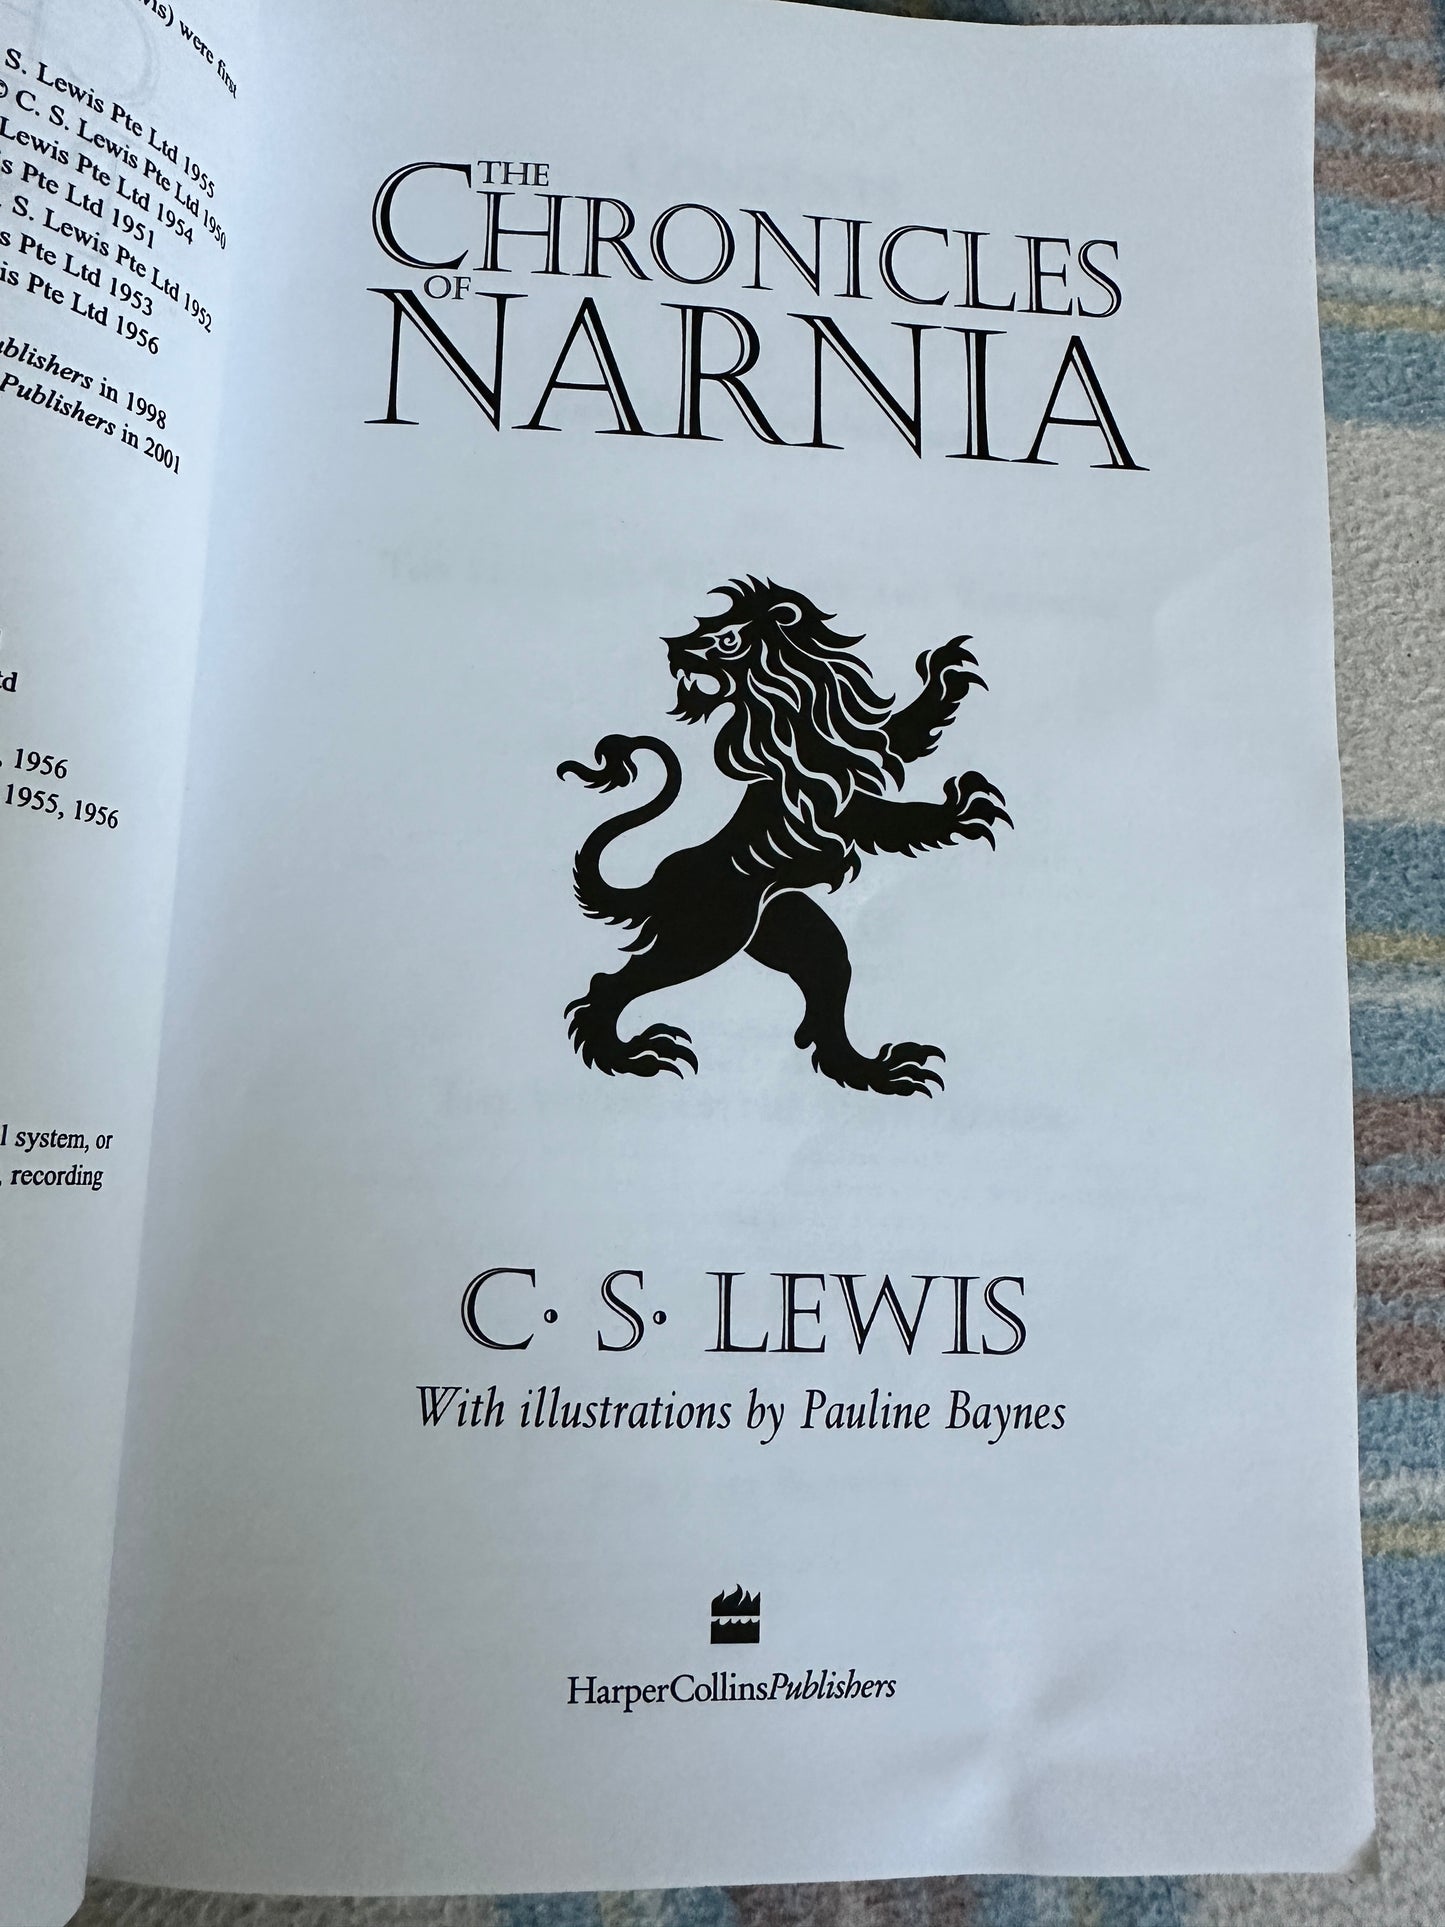 2001 The Chronicles Of Narnia - C. S. Lewis(Harper Collins)